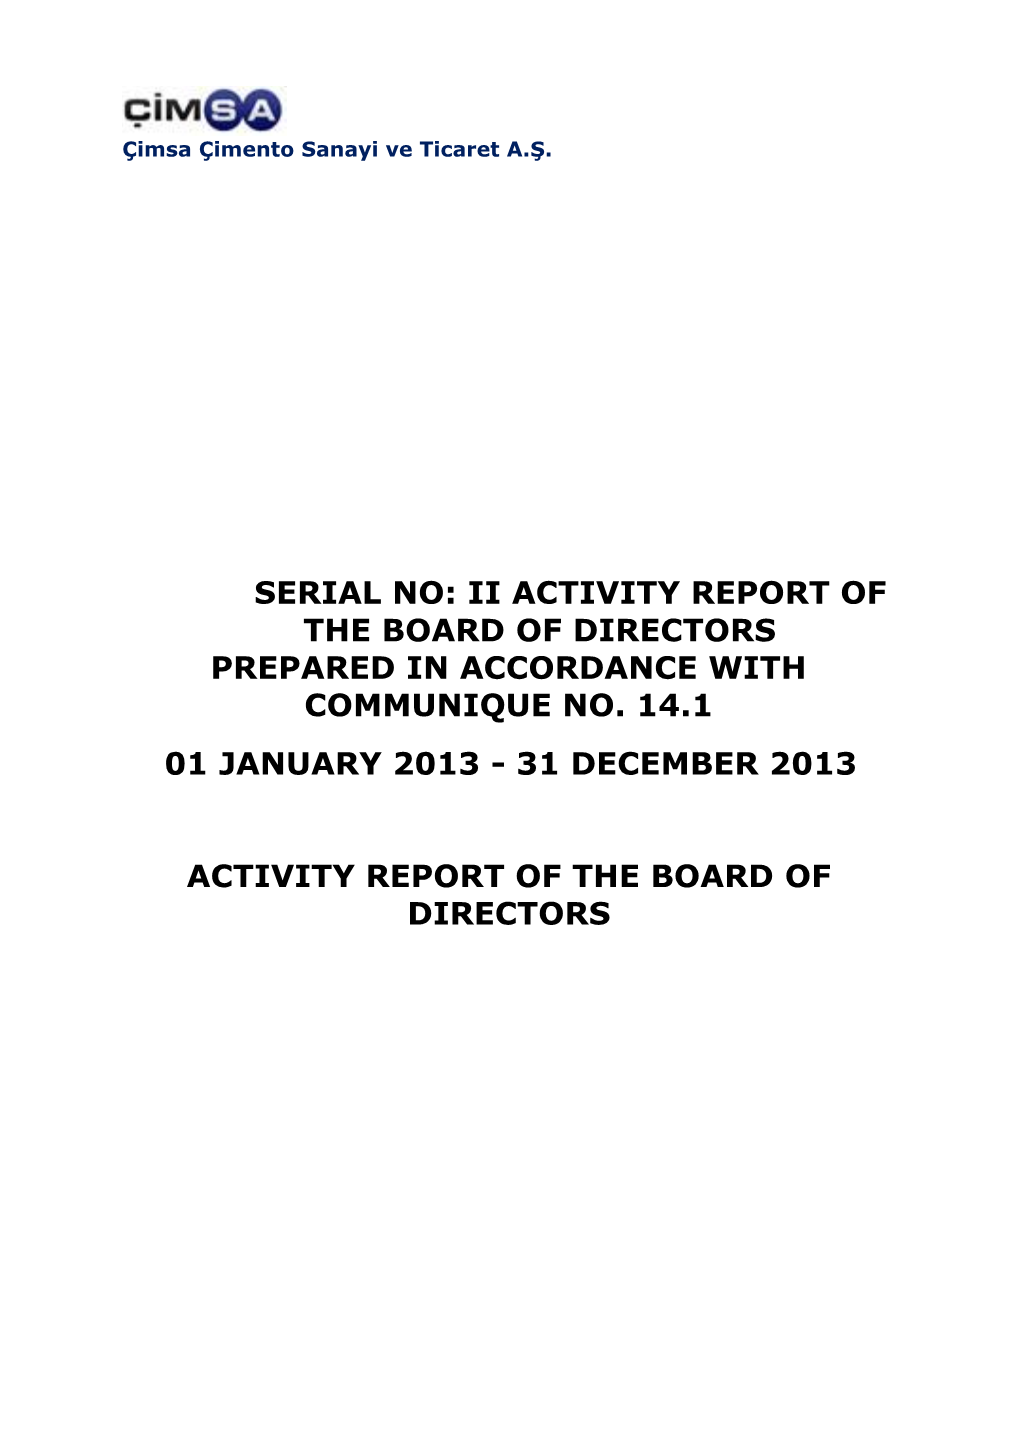 Board of Director's Activity Report As of 31 December 2013